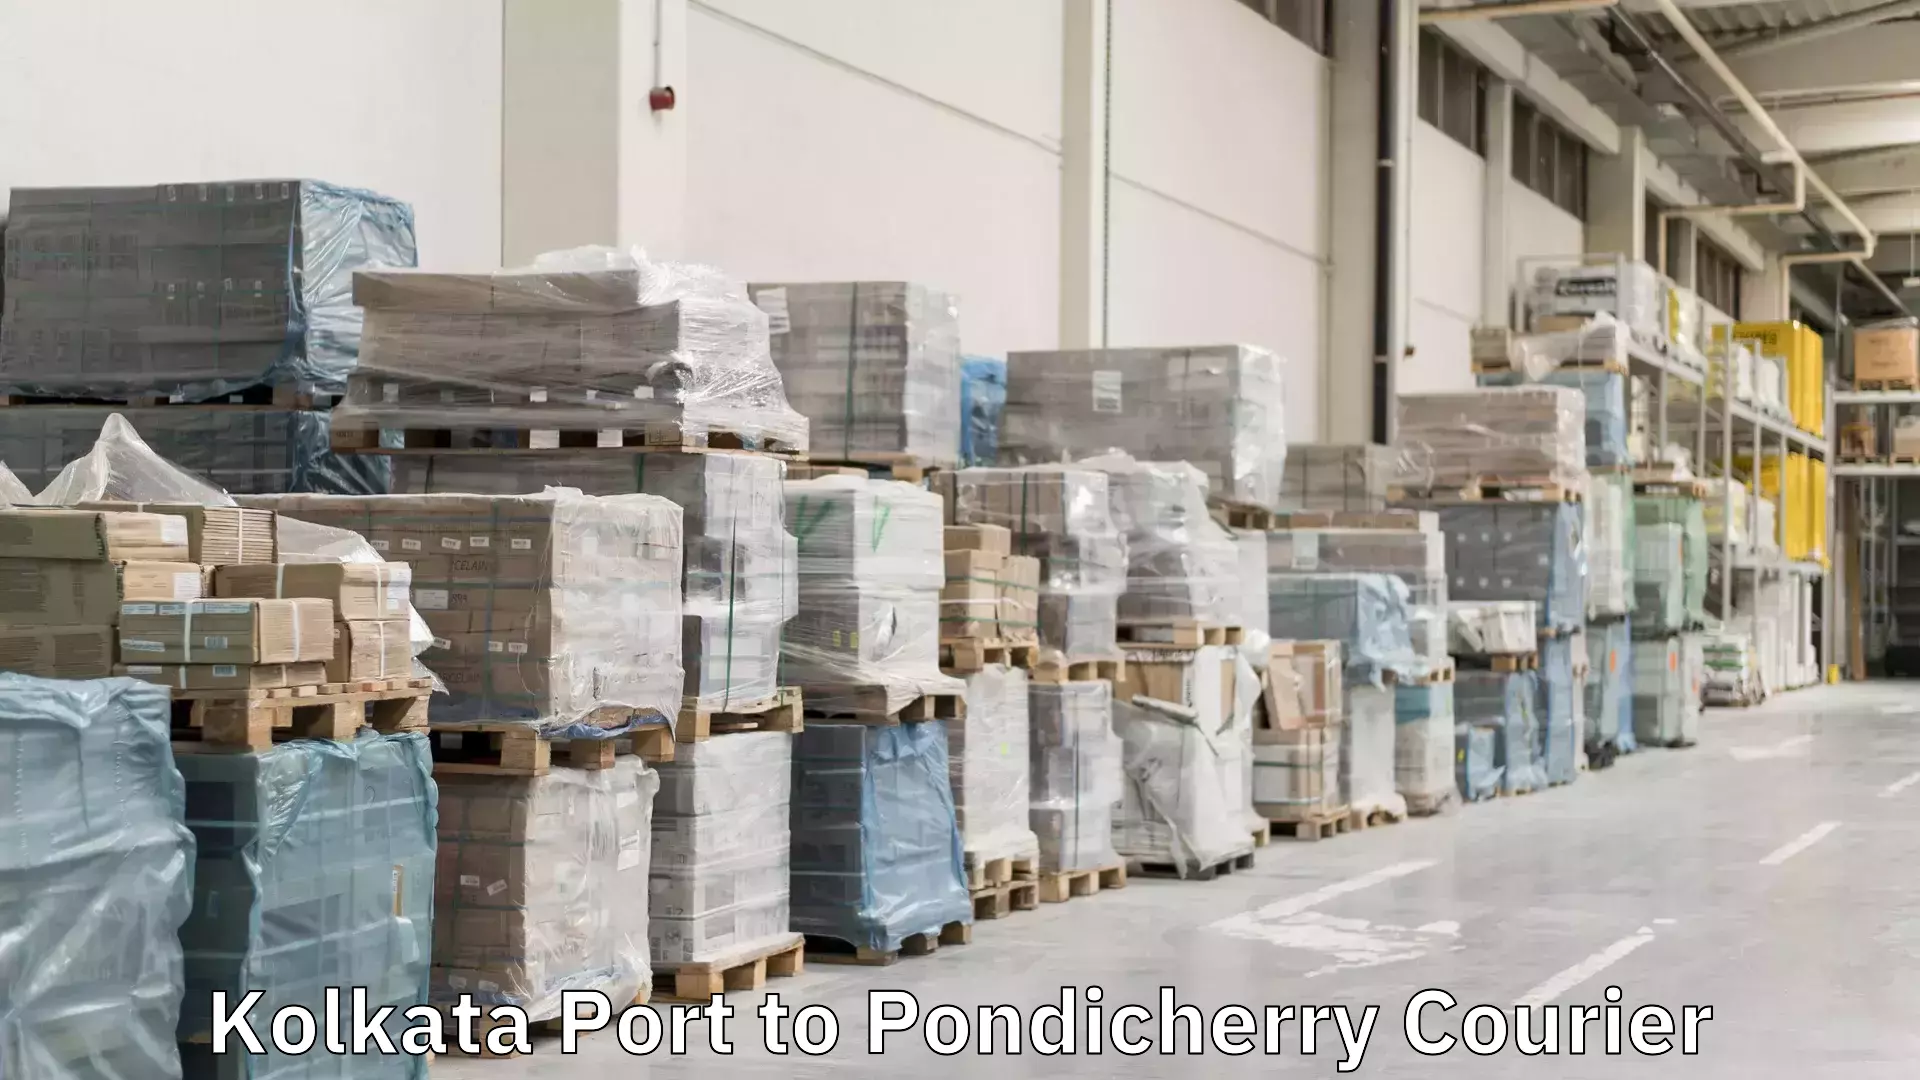 Secure freight services in Kolkata Port to Pondicherry